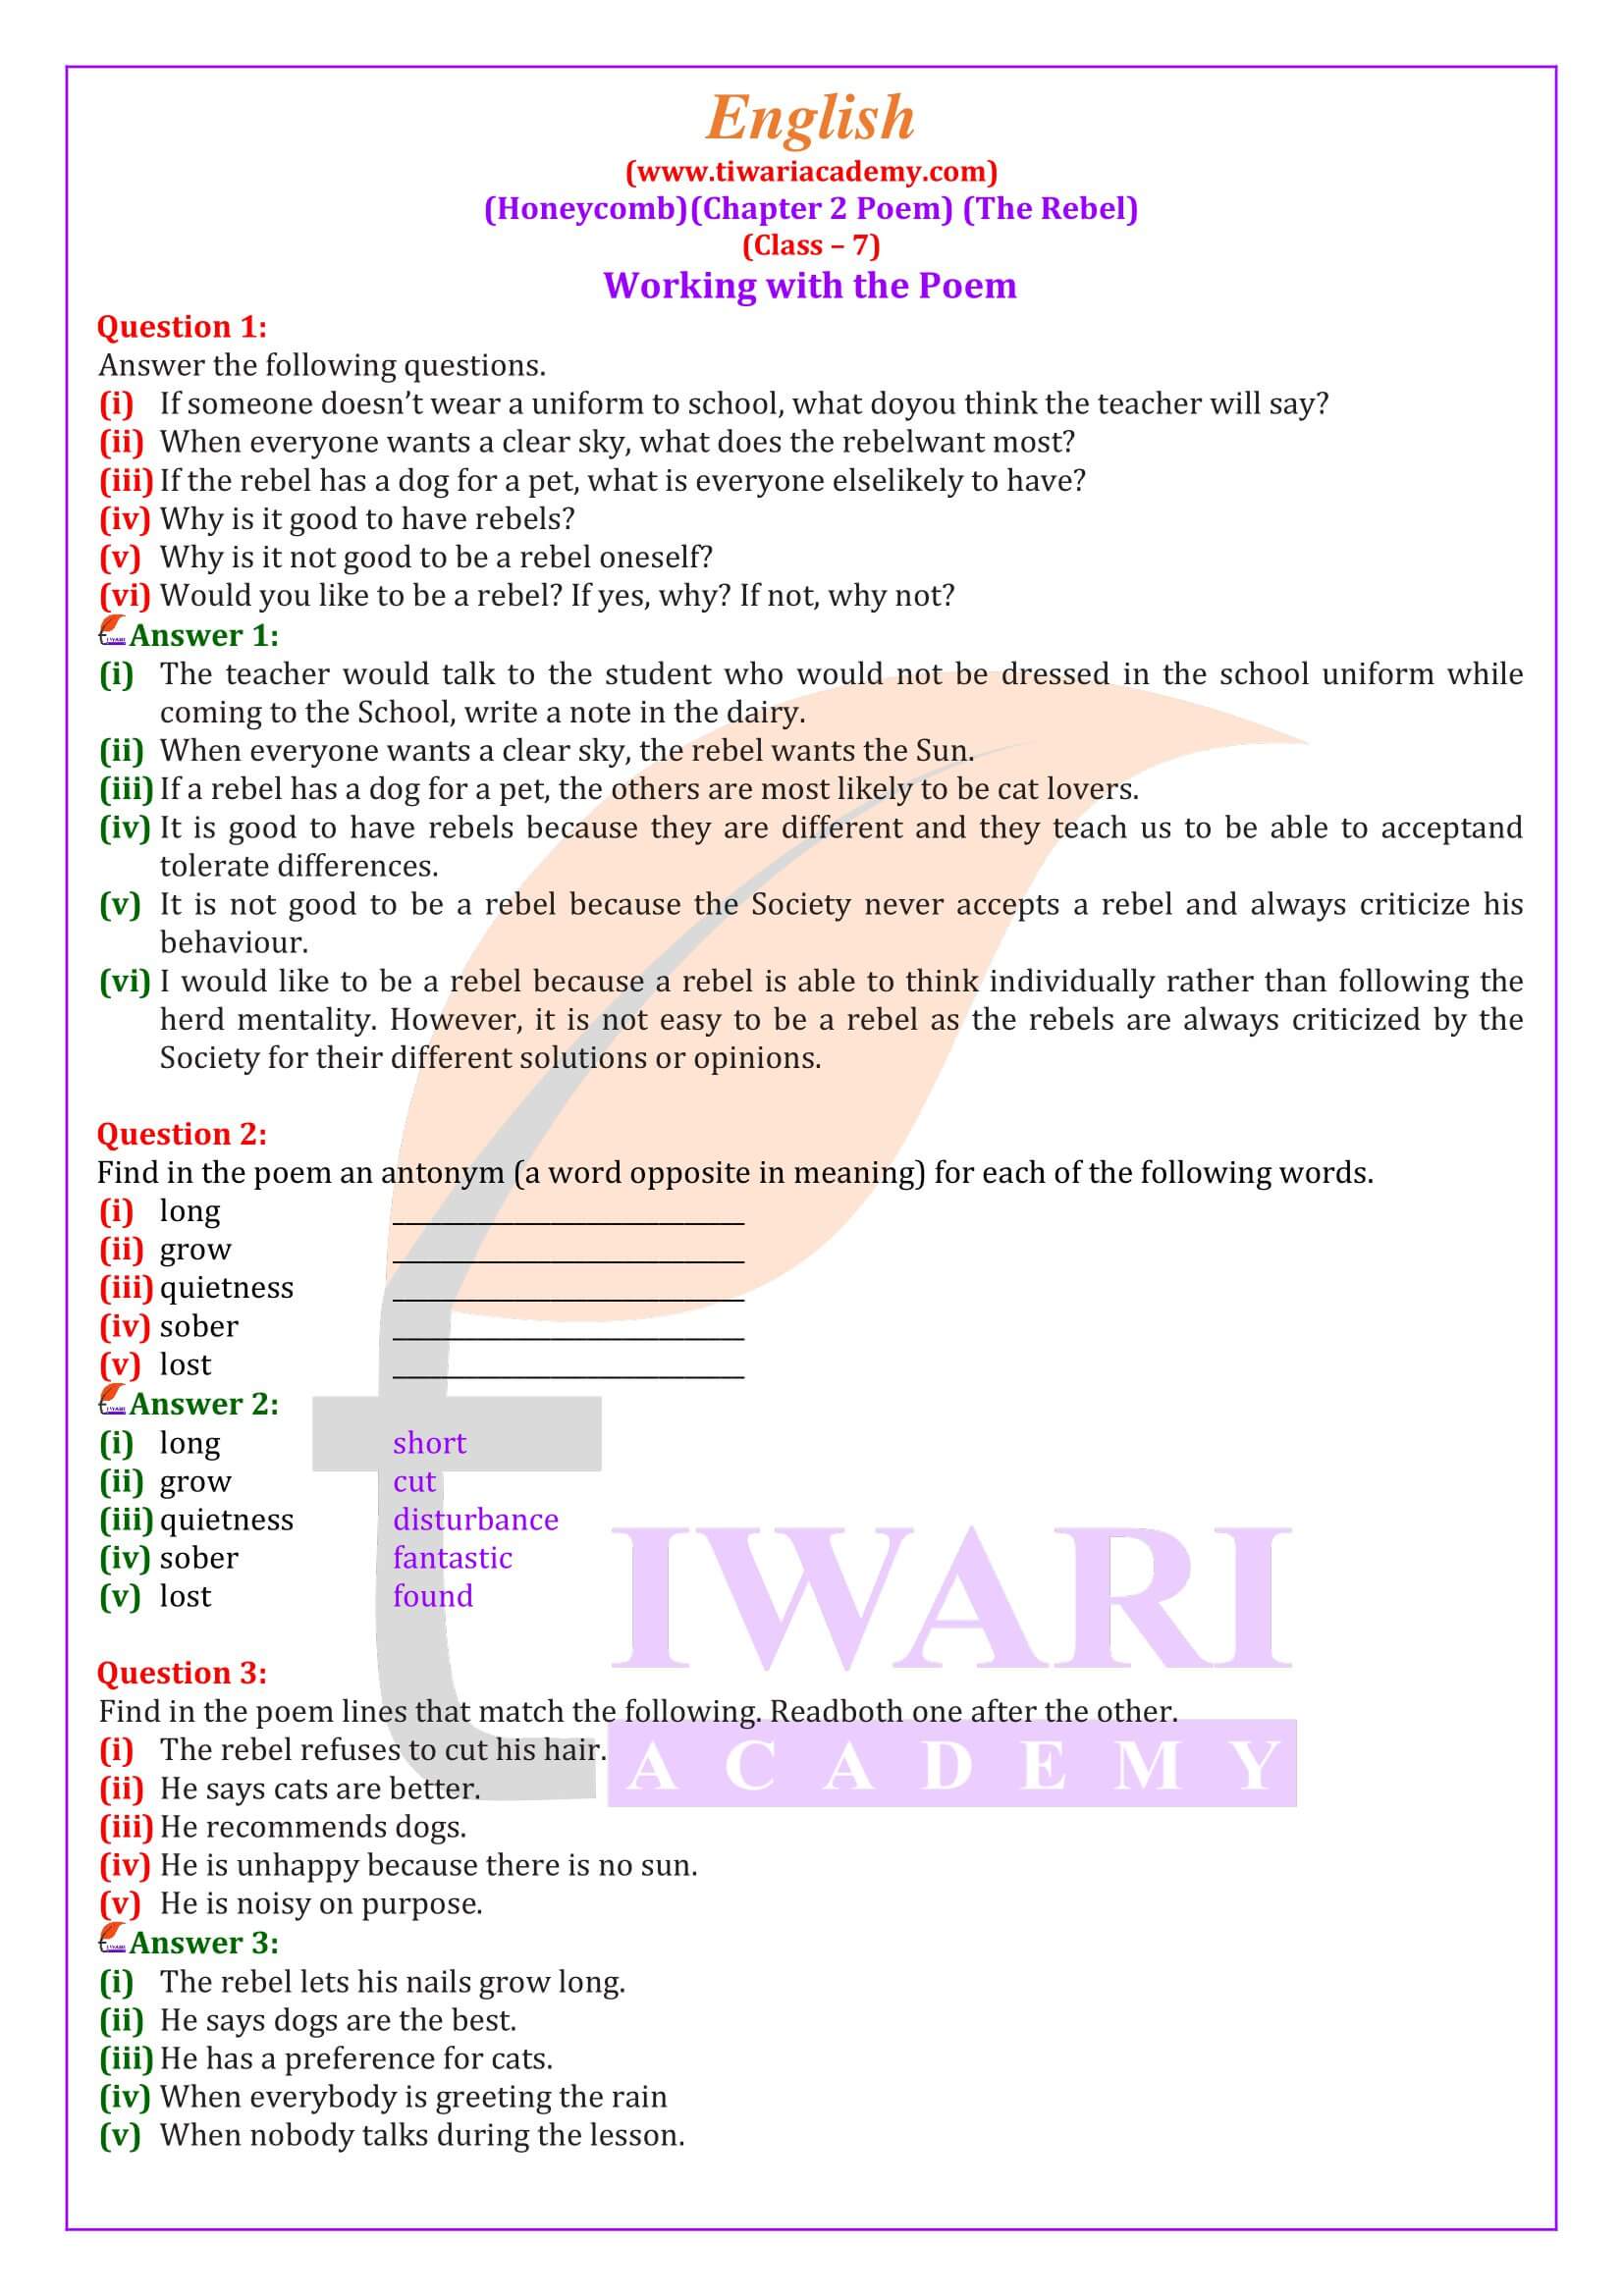 Class 7 English Honeycomb Chapter 2 Poem answers